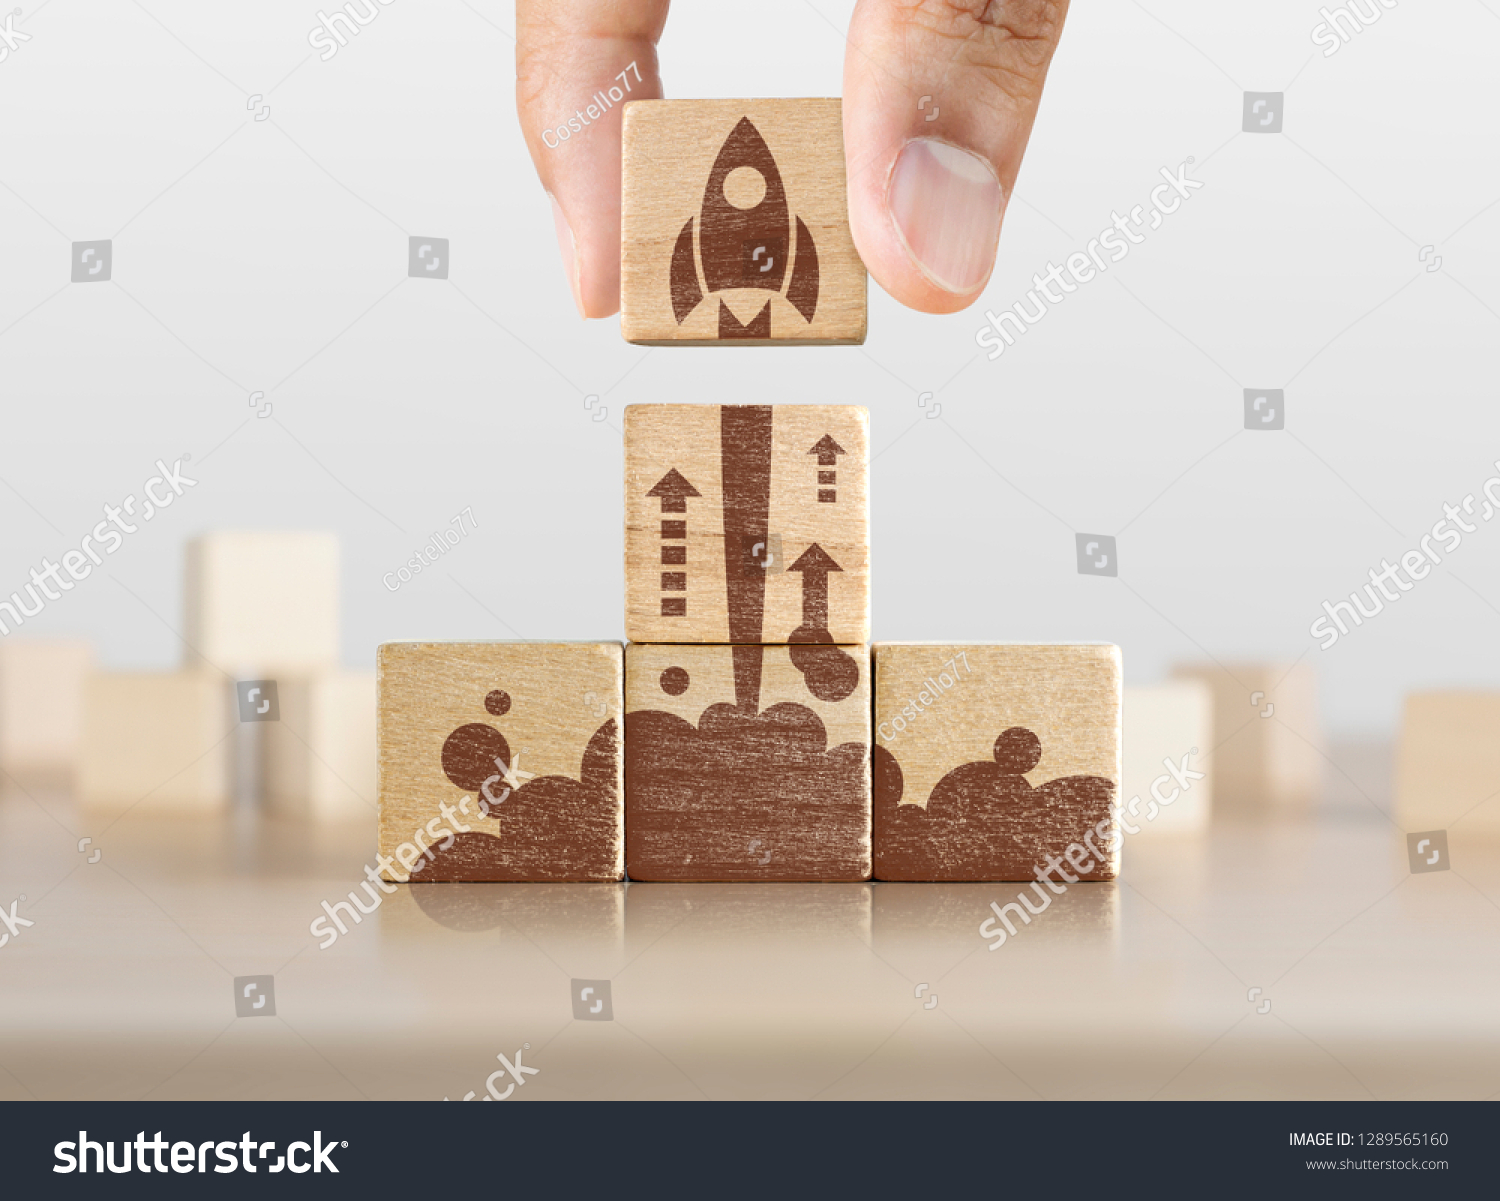 Business start up, start, new project or new idea concept. Wooden blocks with launching rocket graphic arranged in pyramid shape and a man is holding the top one. #1289565160